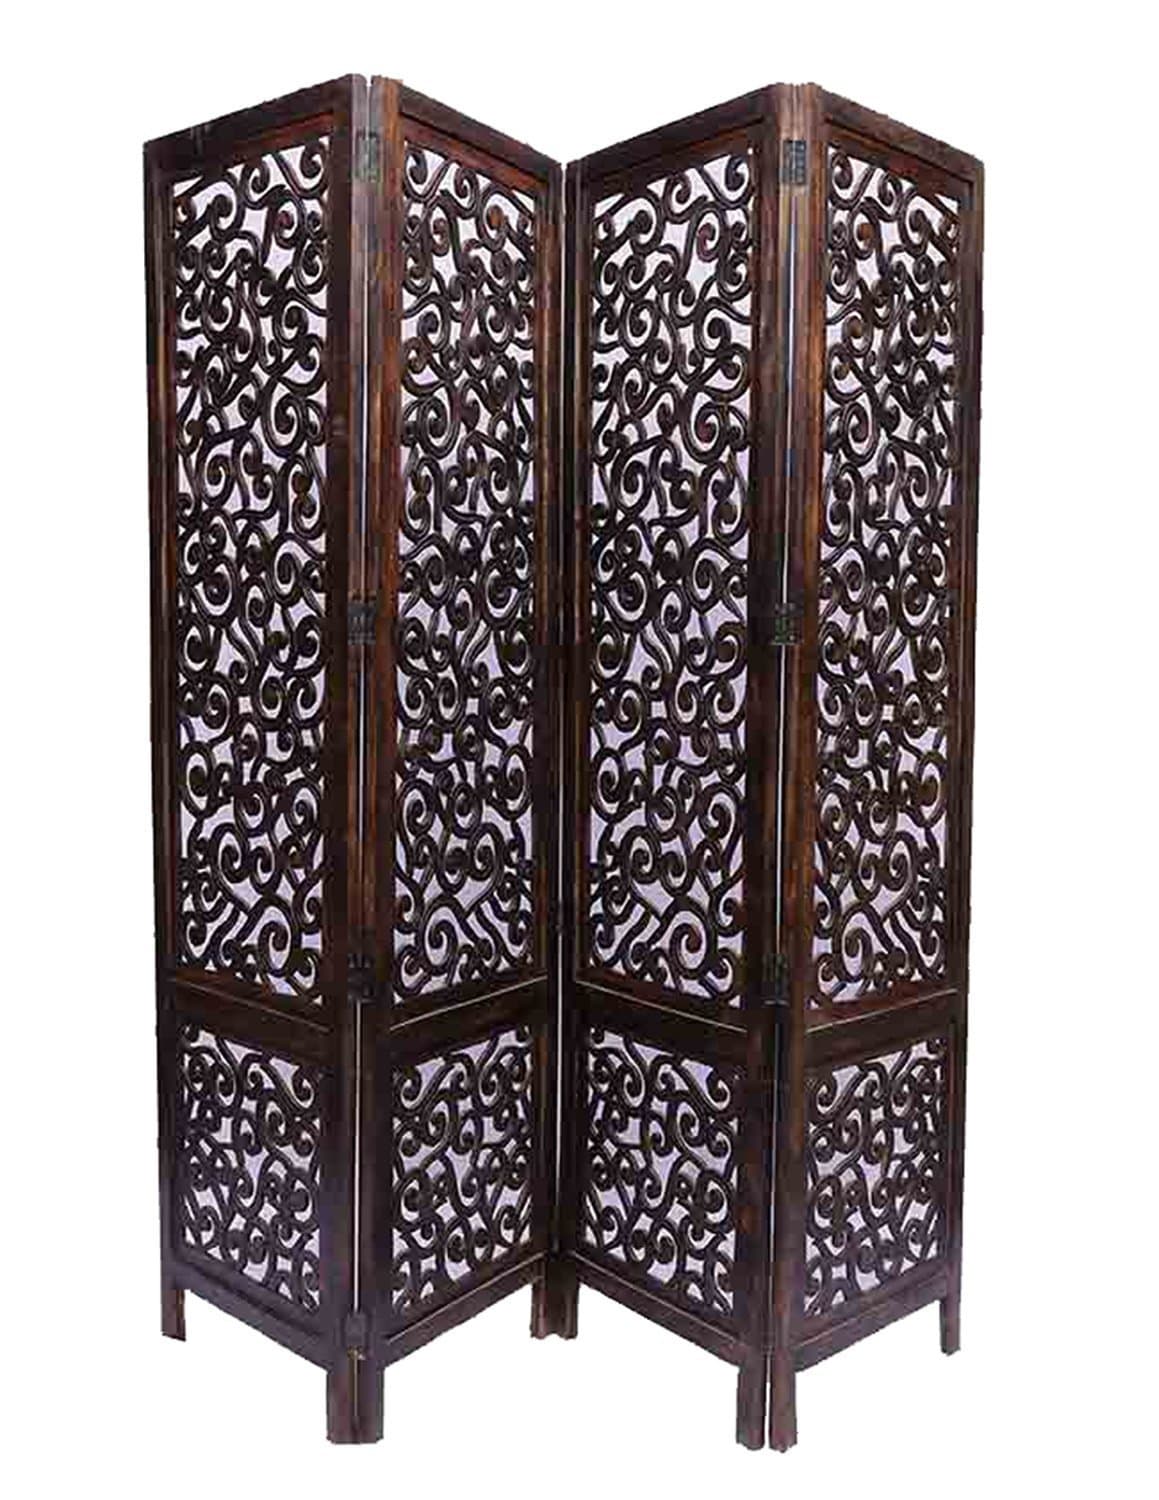 Handcrafted/Handmade Wooden Room Divider/Partition Screen/Panel / 4 Panel Partition Wooden Partition Room Dividers for Home & Kitchen Office Wall